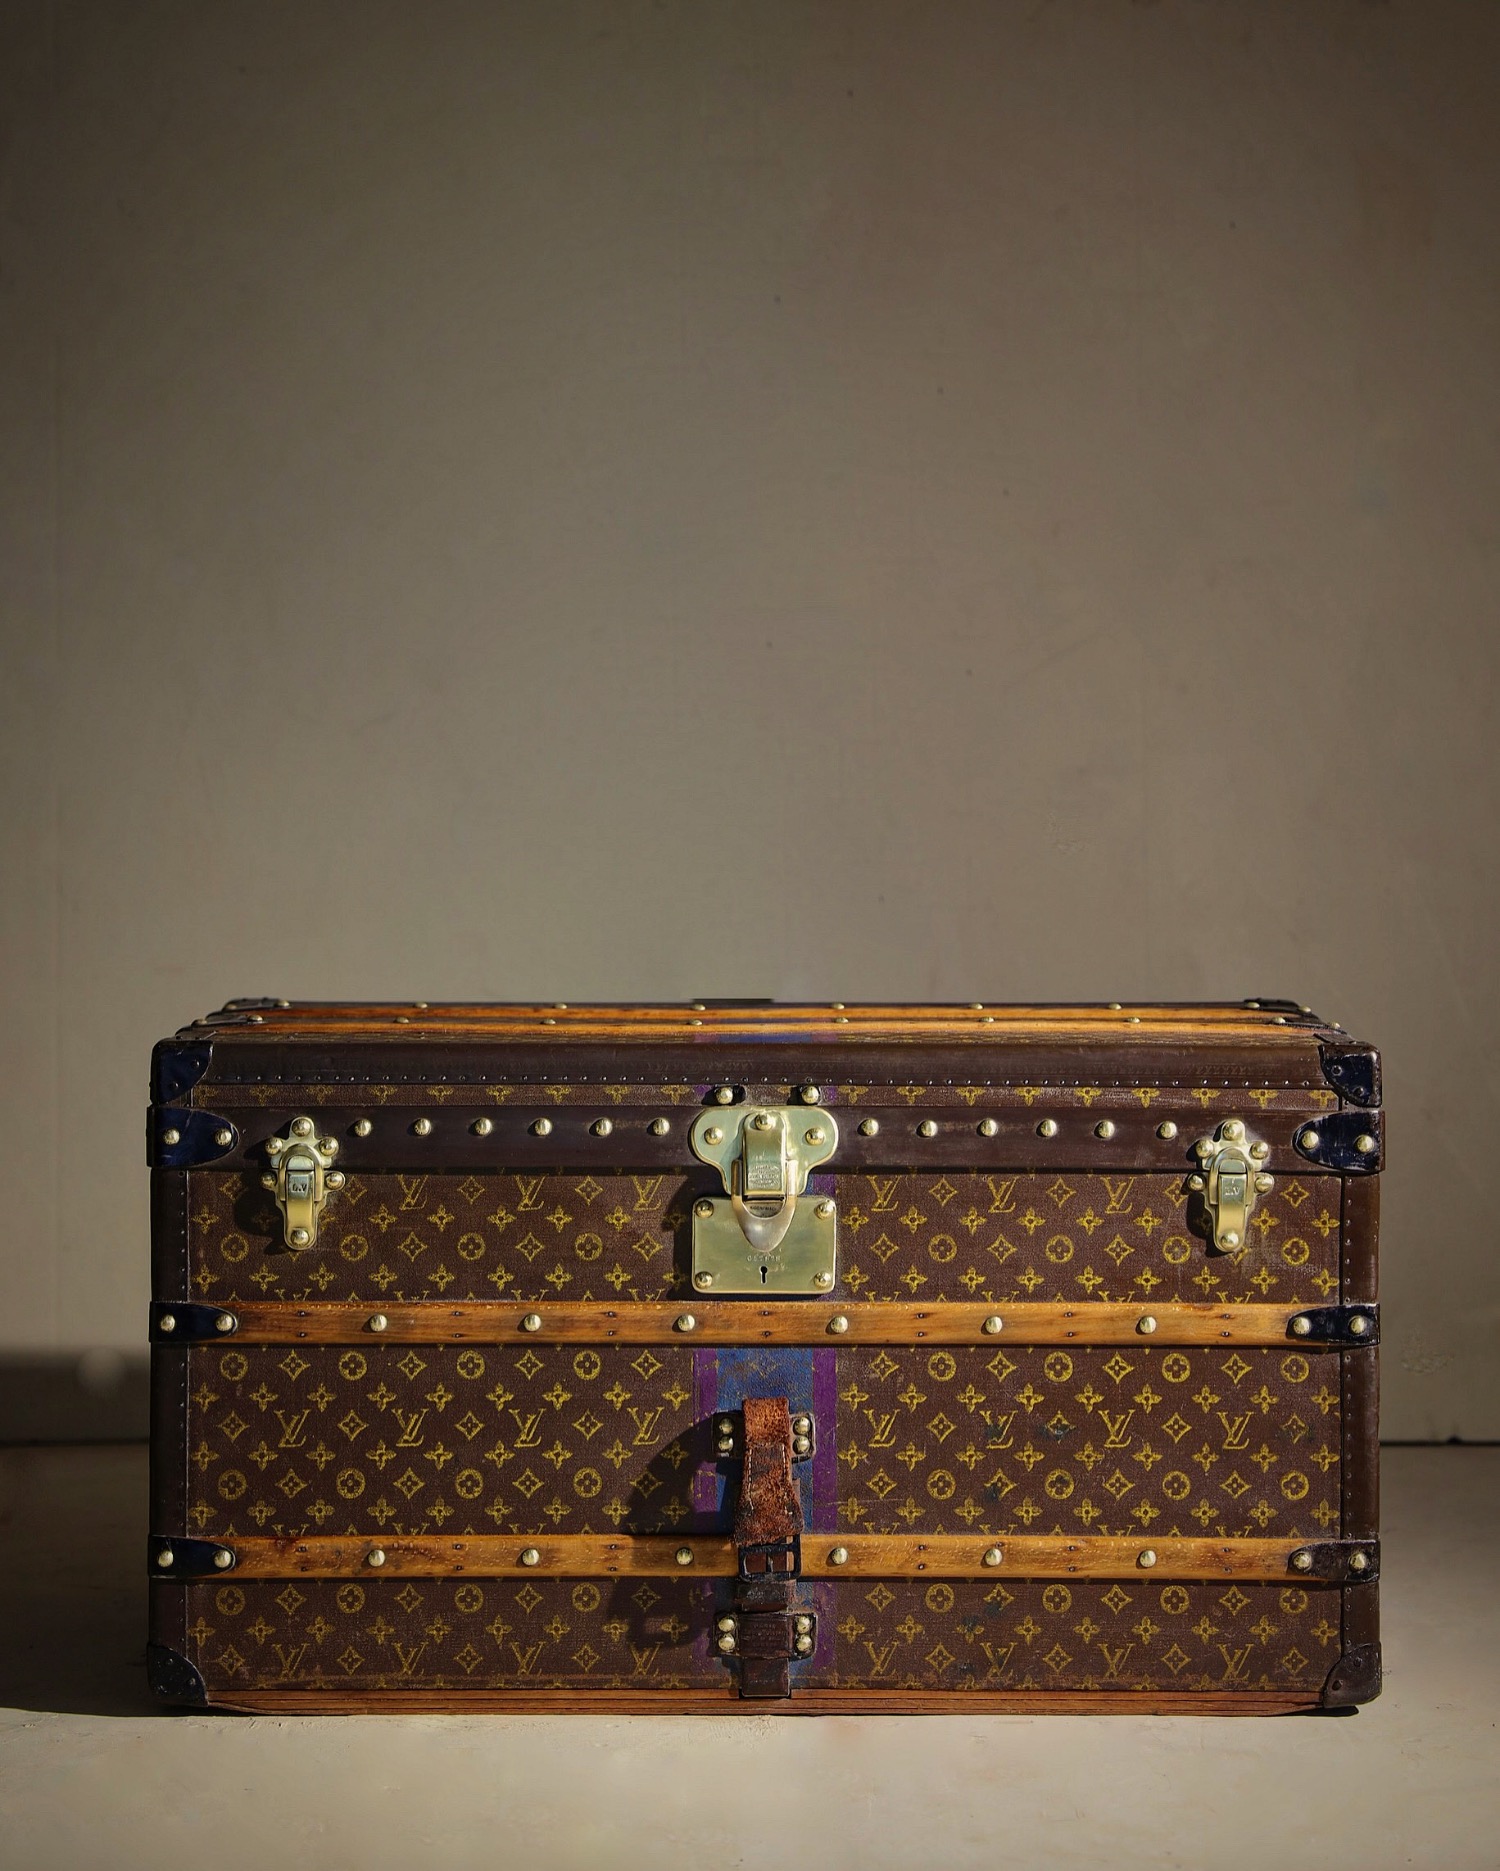 the-well-traveled-trunk-louis-vuitton-thumbnail-product-5796-1